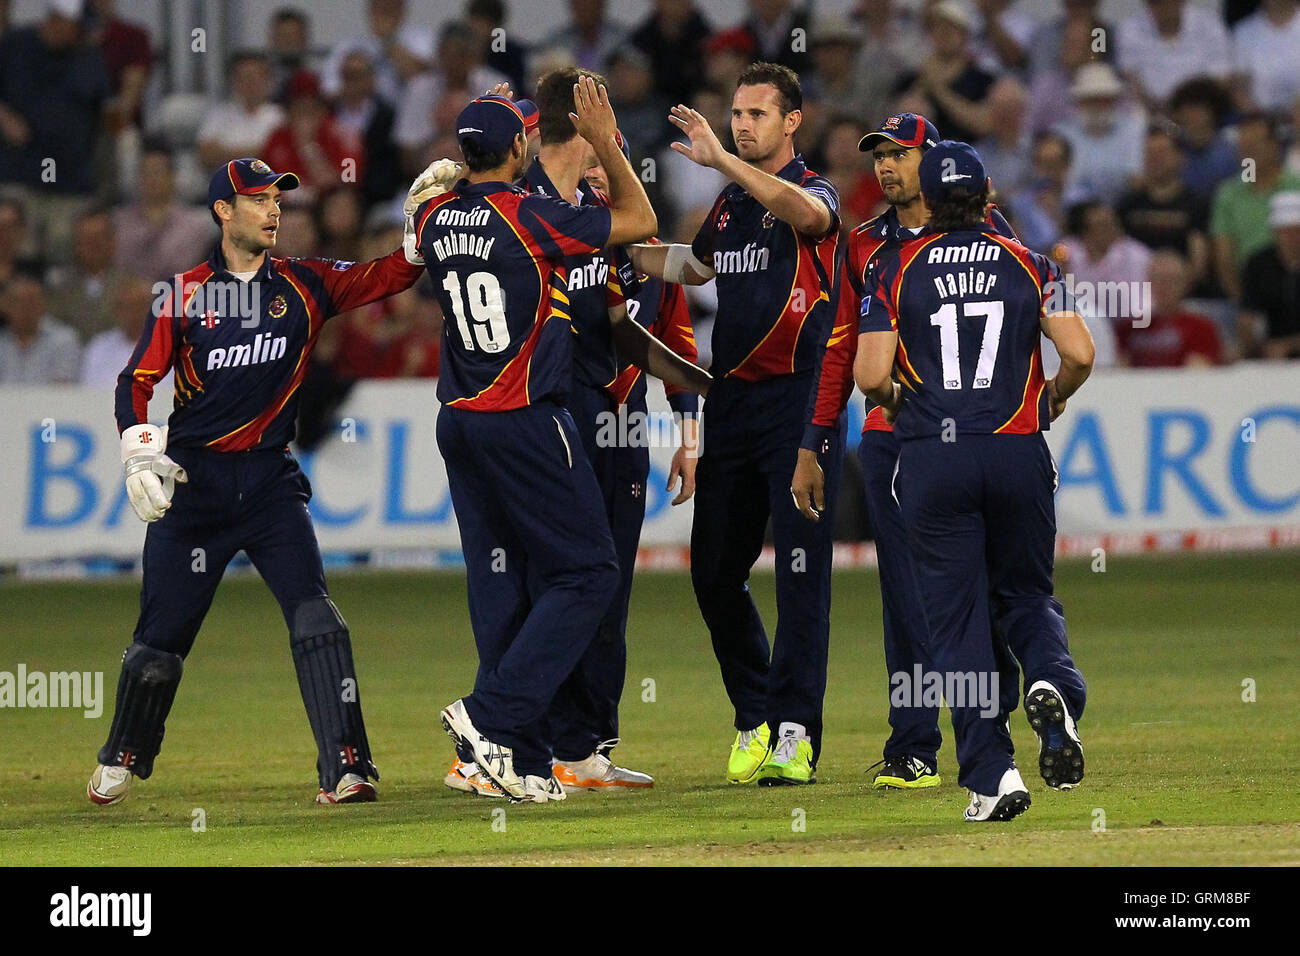 Shaun Tait of Essex (C) is congratulated on the run-out of James Tredwell - Essex Eagles vs Kent Spitfires - Friends Life T20 Cricket at the Essex County Ground, Chelmsford - 08/07/13 Stock Photo